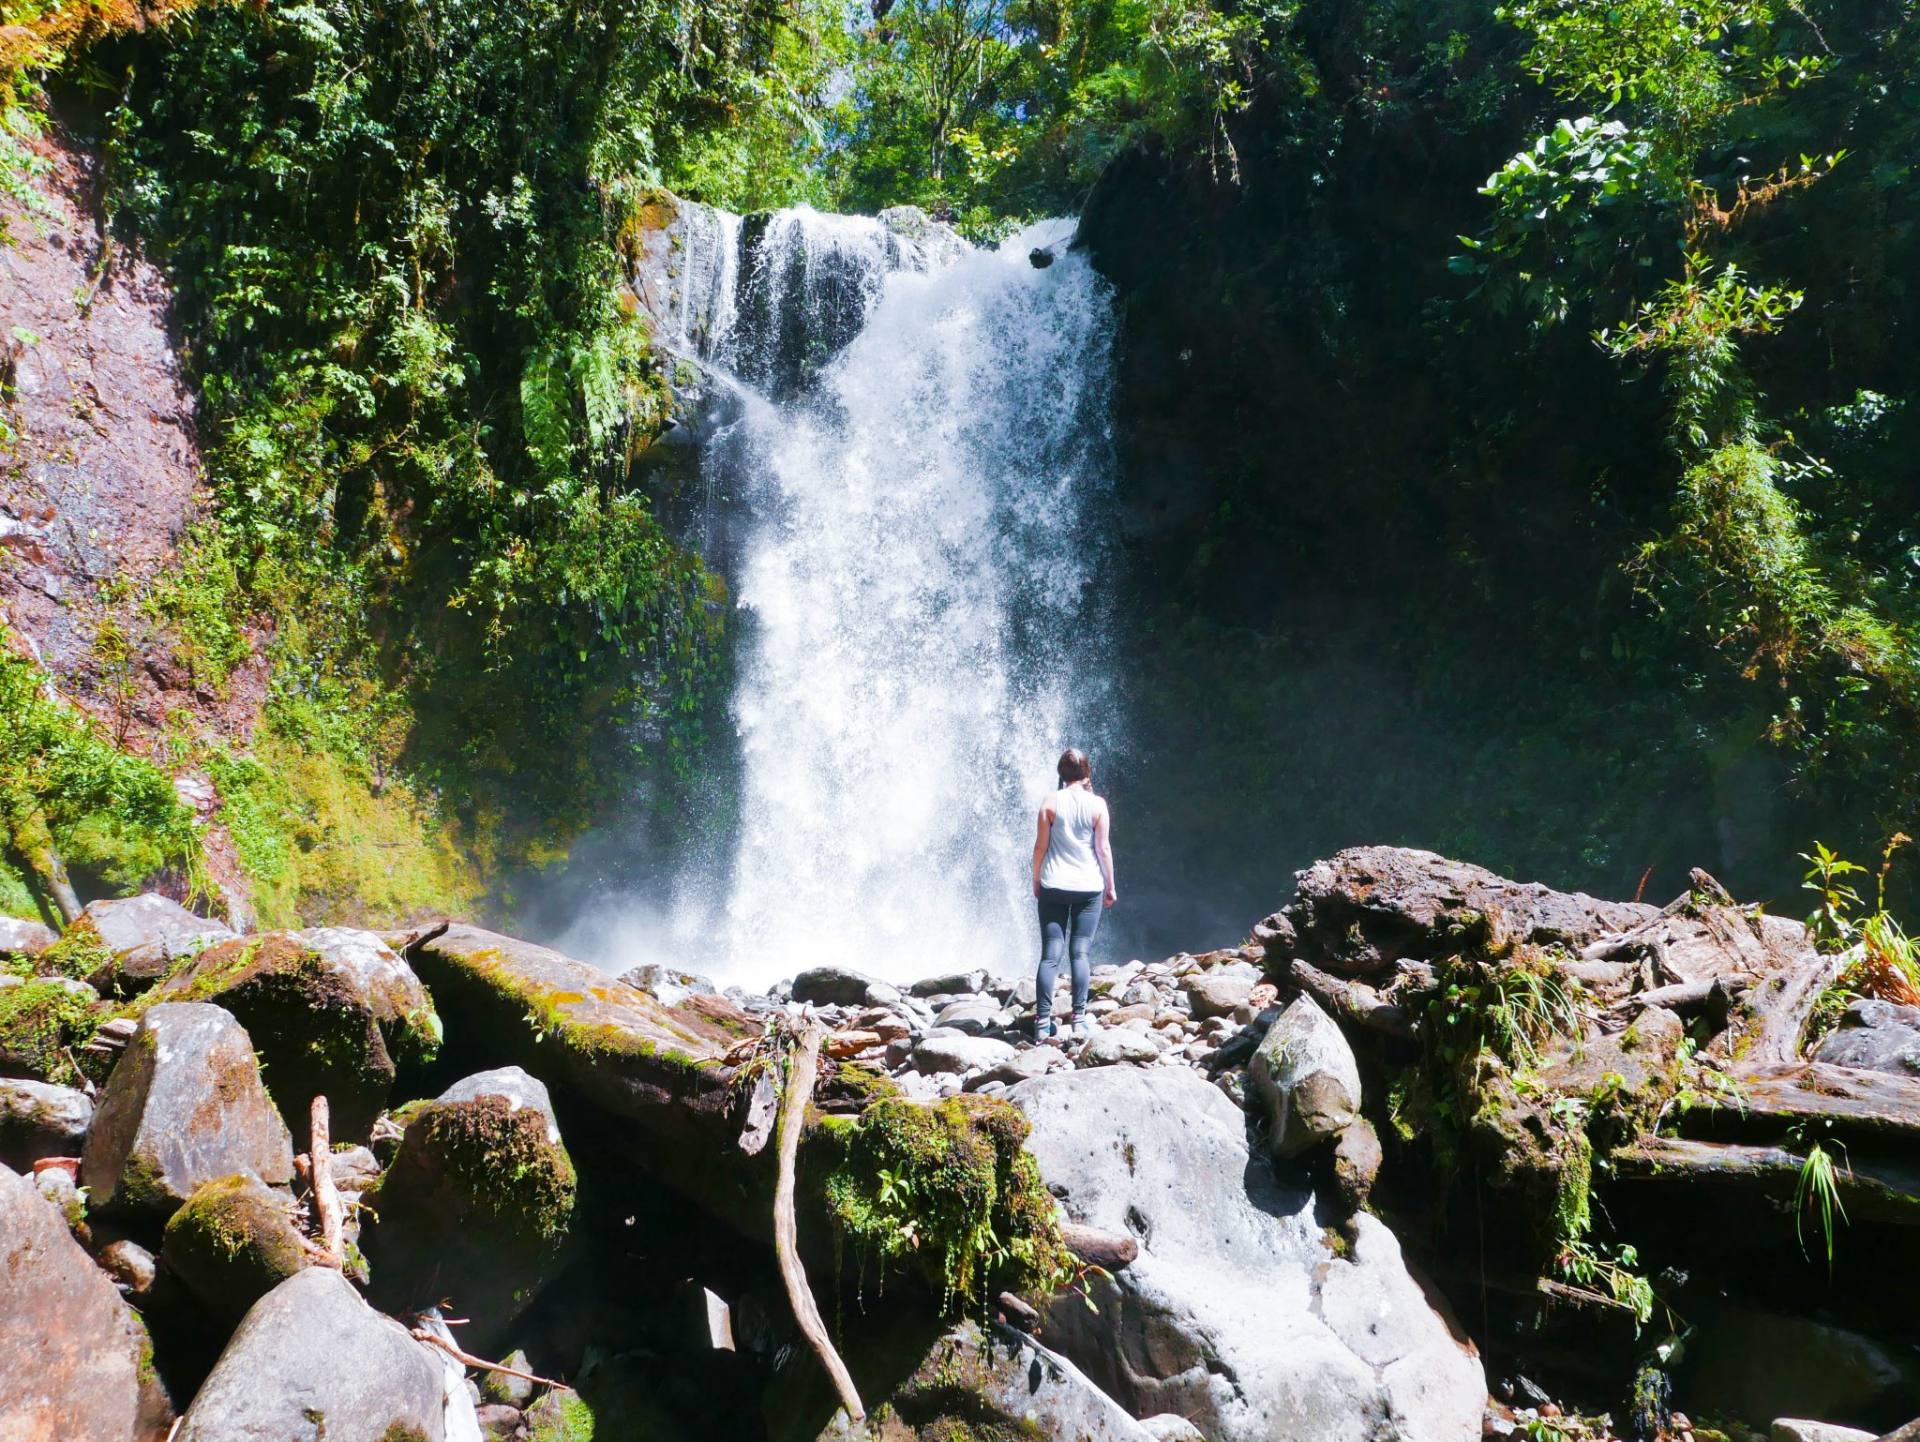 Hiking the Lost Waterfalls trail in Boquete, Panama is an absolutely more. Read this post to find out all about Boquete's best hike!